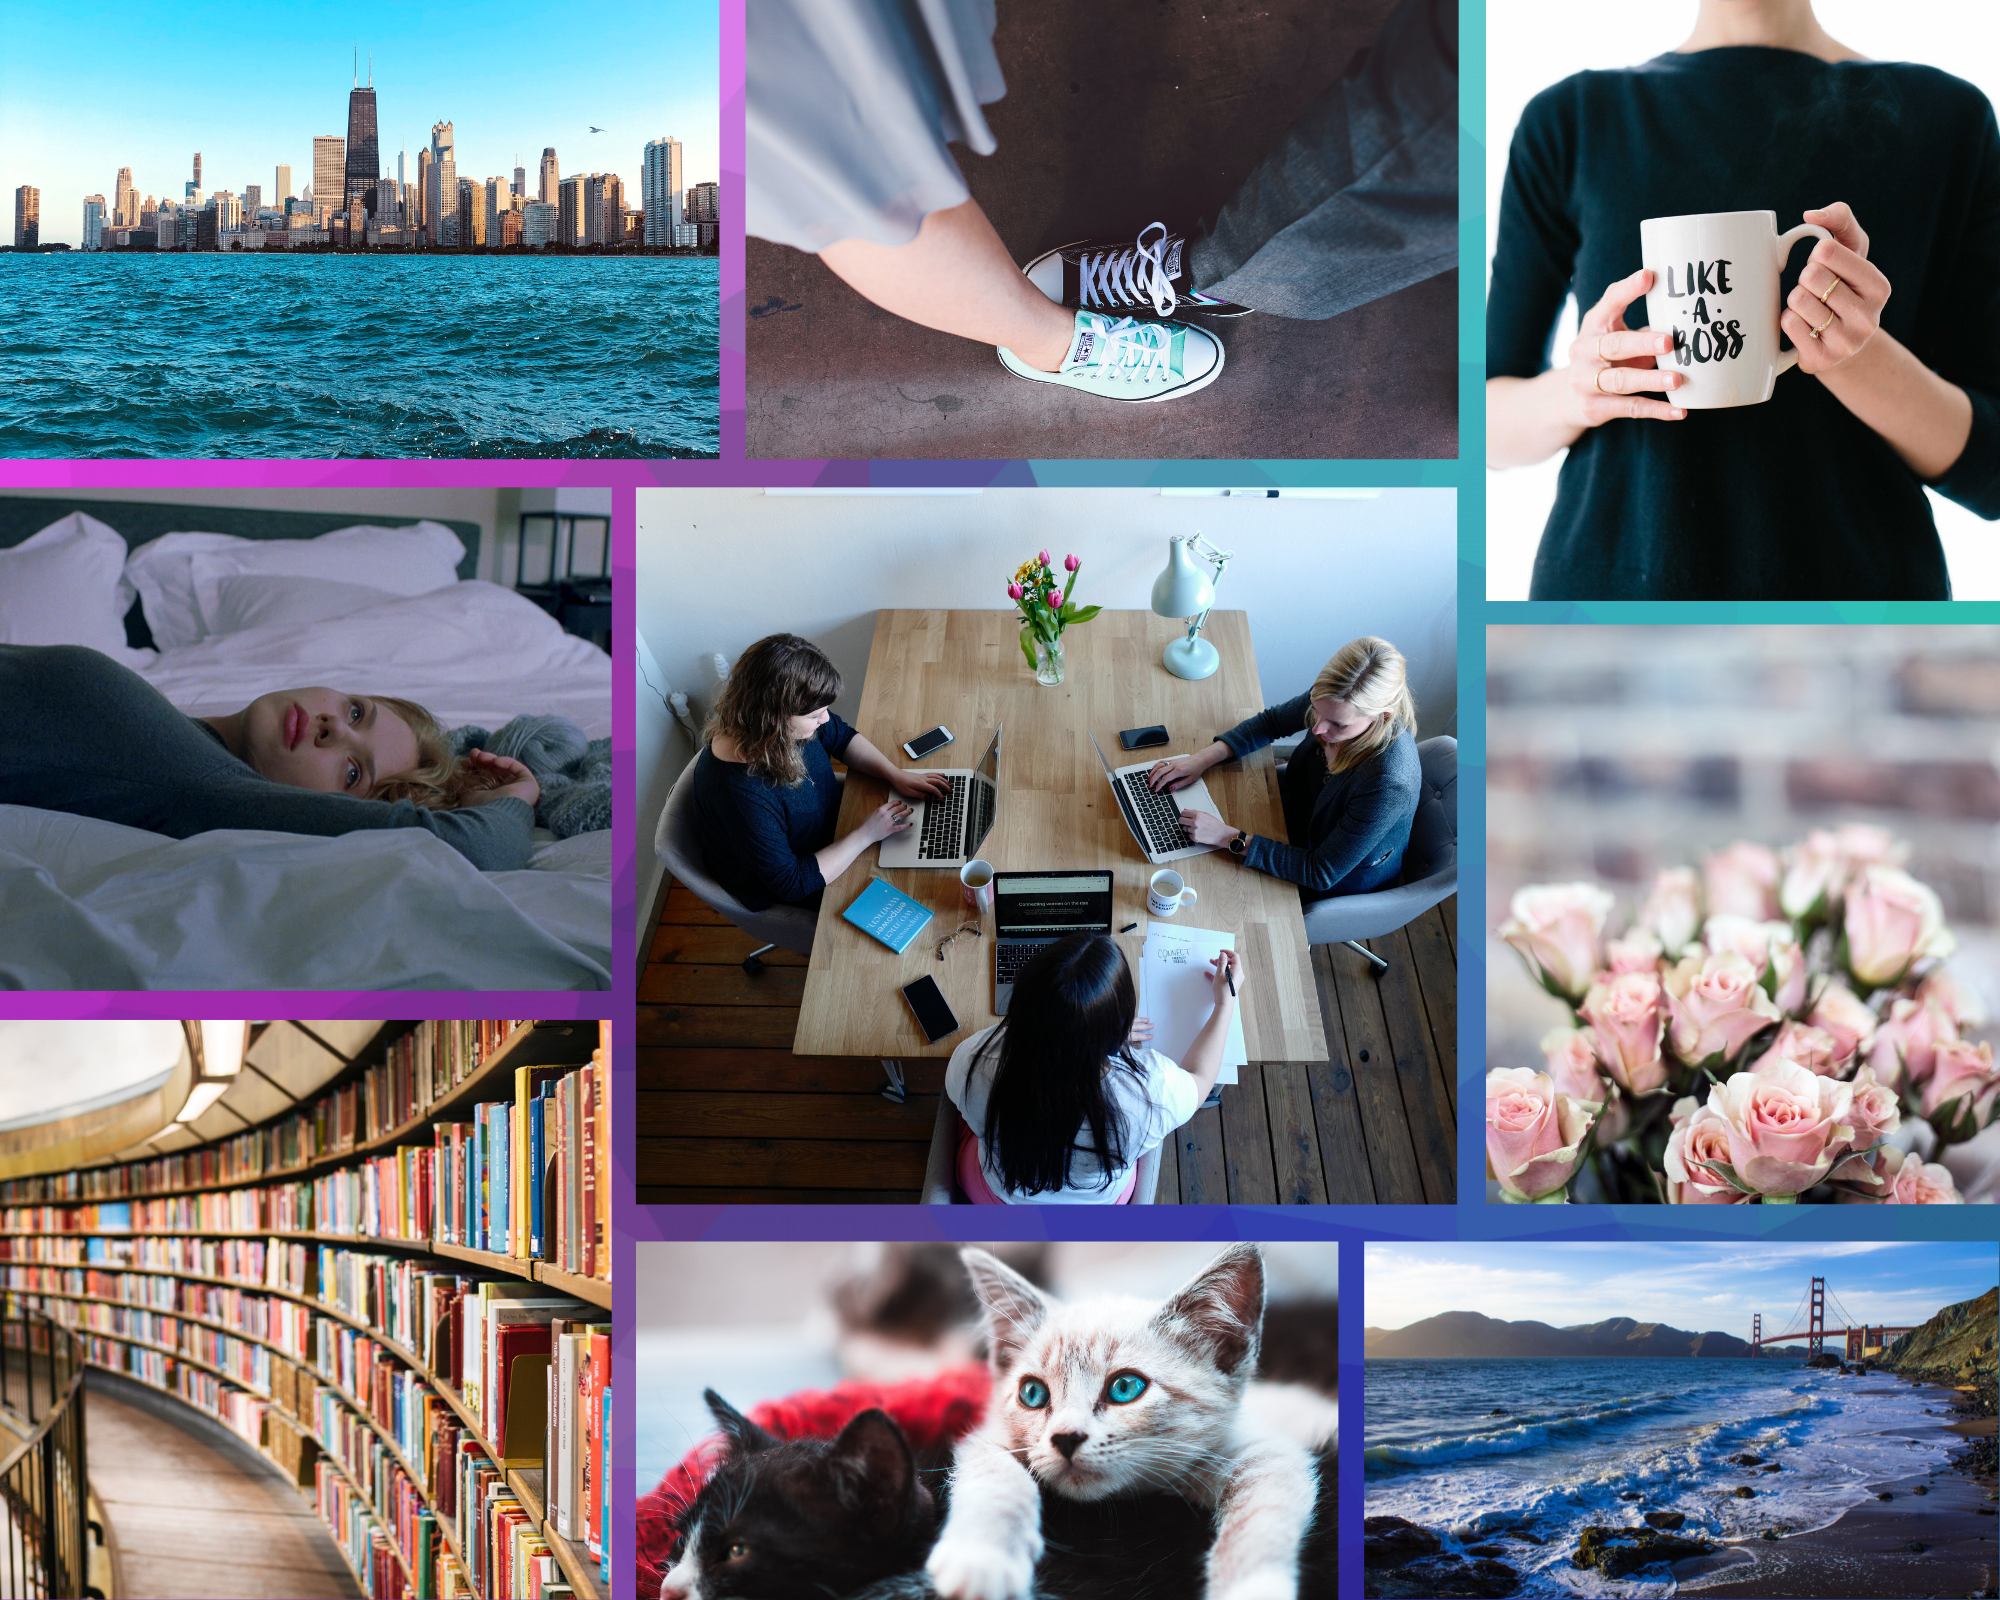 Moodboard clockwise from top left: Chicago skyline and Lake Michigan; man’s foot in black Converse and woman’s foot in turquoise Converse; woman holding “like a boss” mug; creamy-pink roses; Golden Gate Bridge and blue water; black cat and white cat; library filled with books; blonde woman lying in bed; women working around table